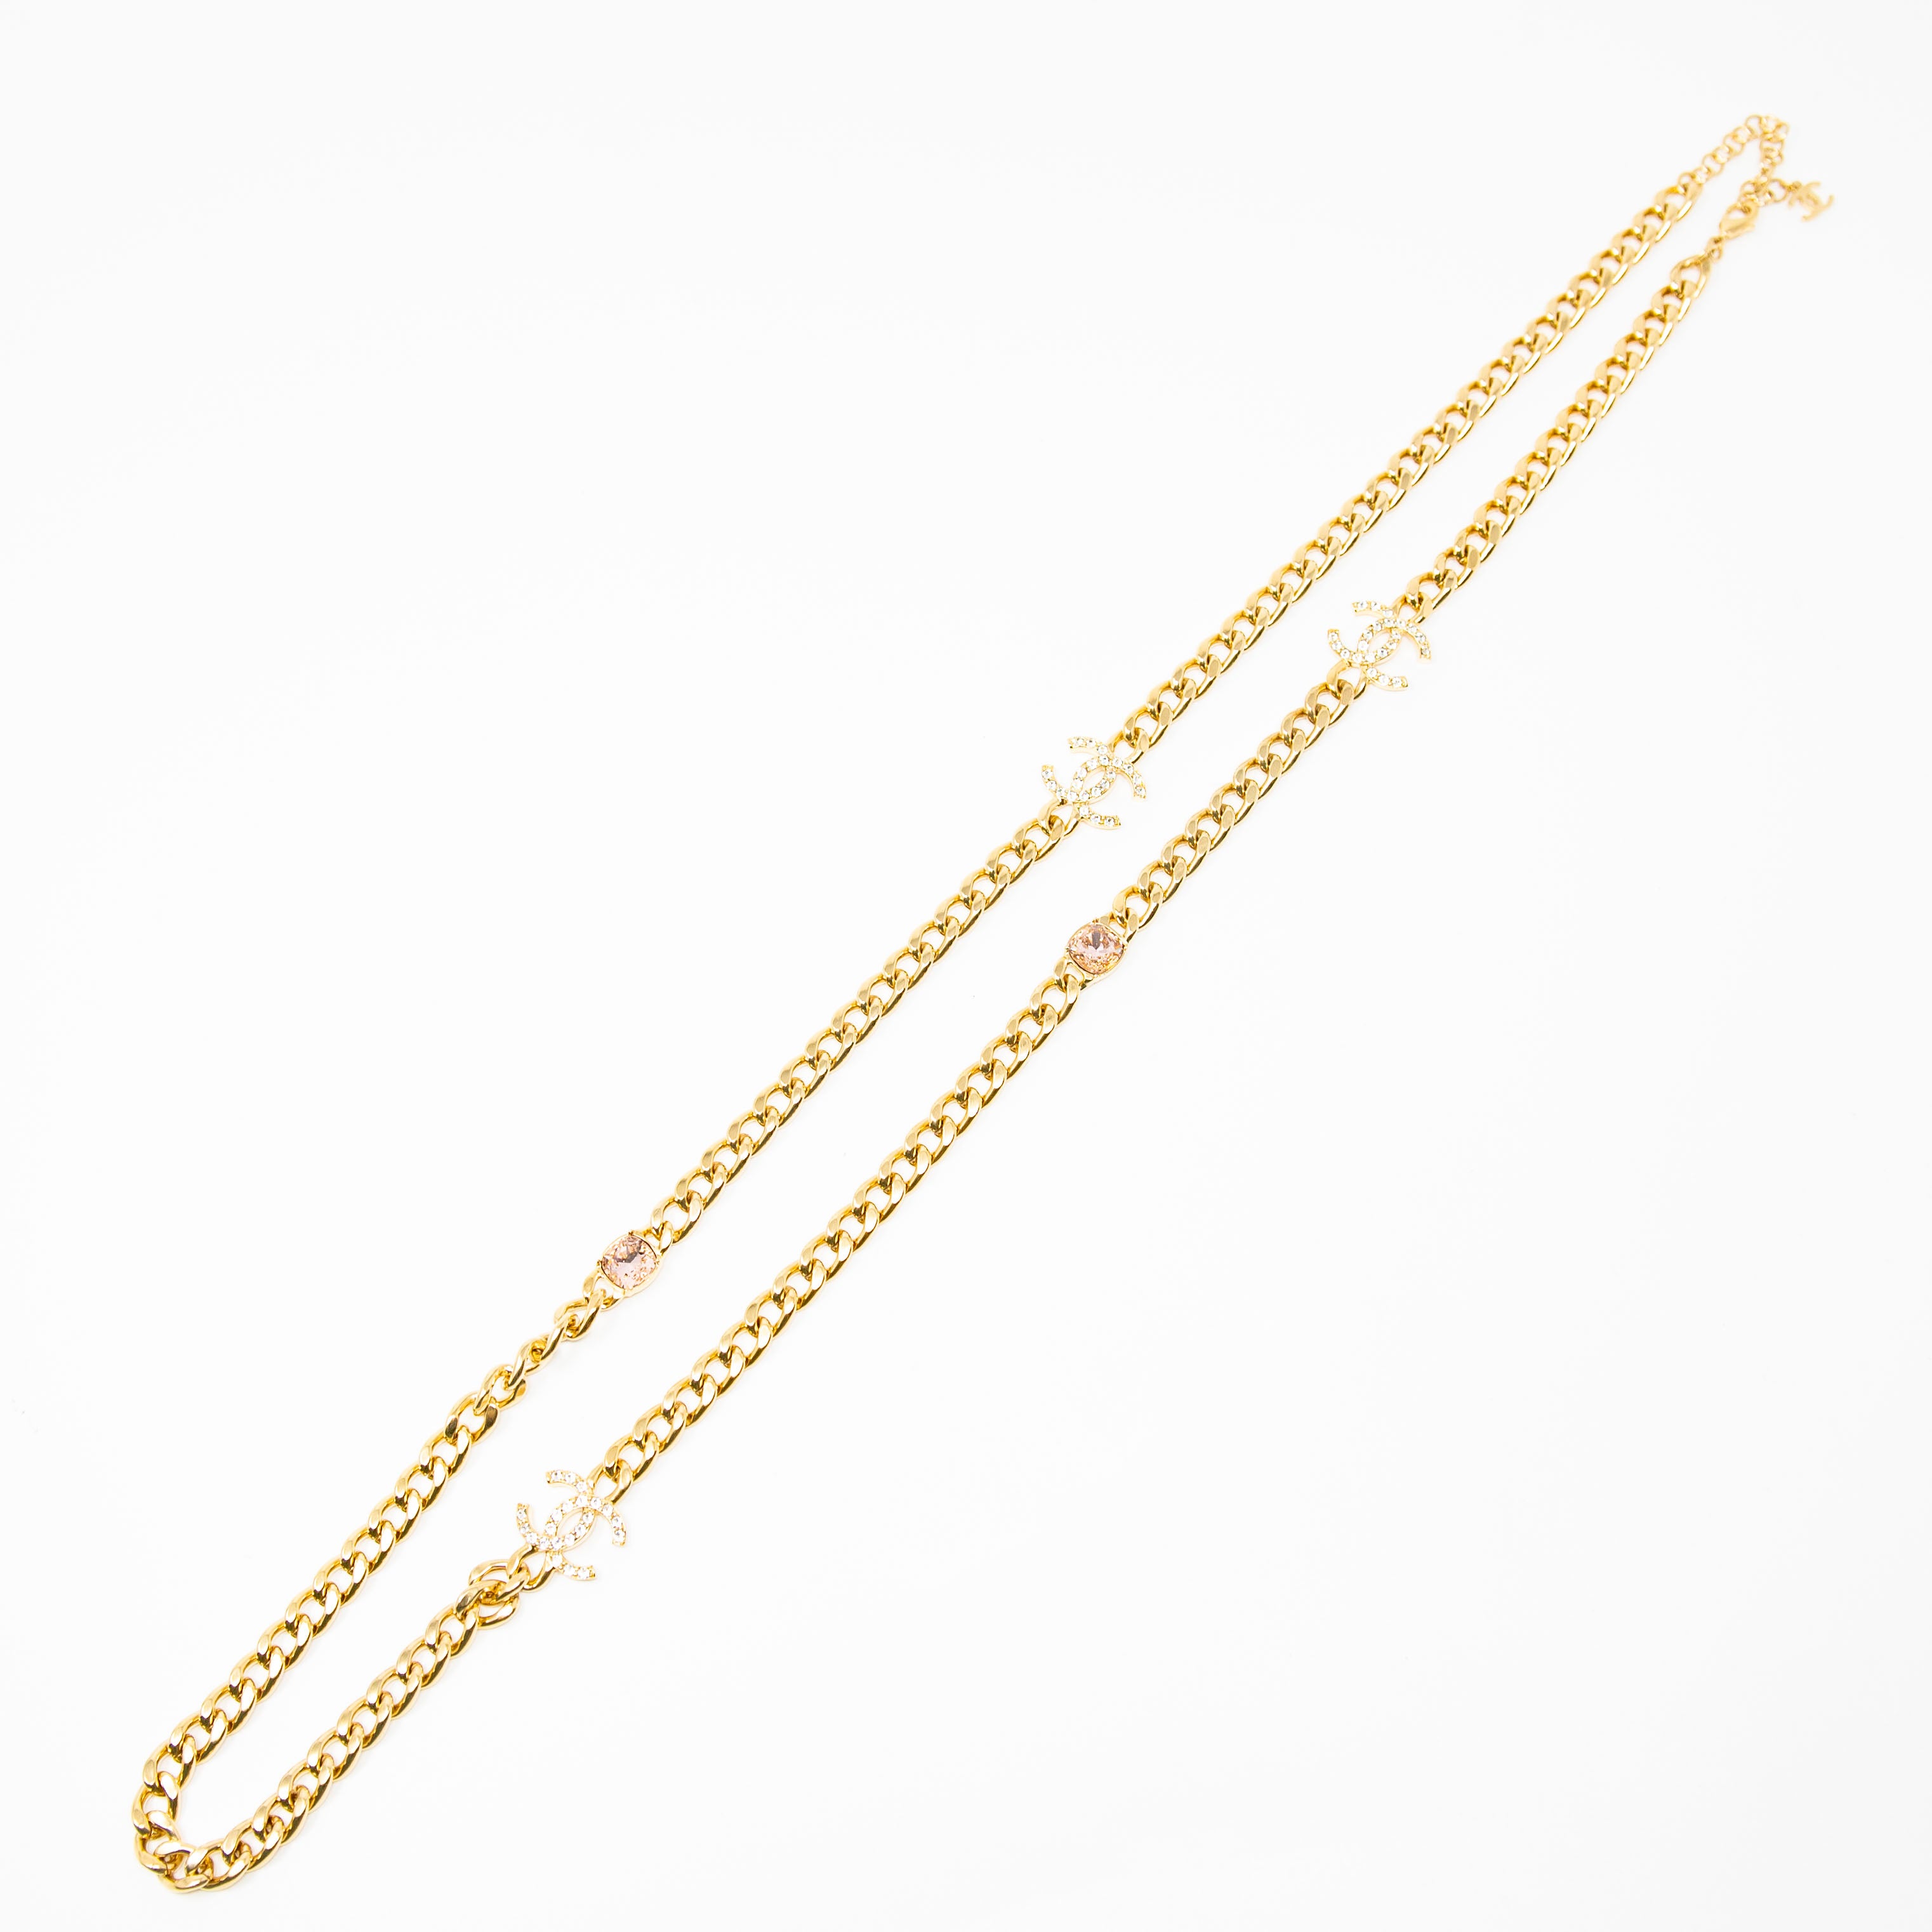 Chanel Crystal CC Long Chain Belt/Necklace